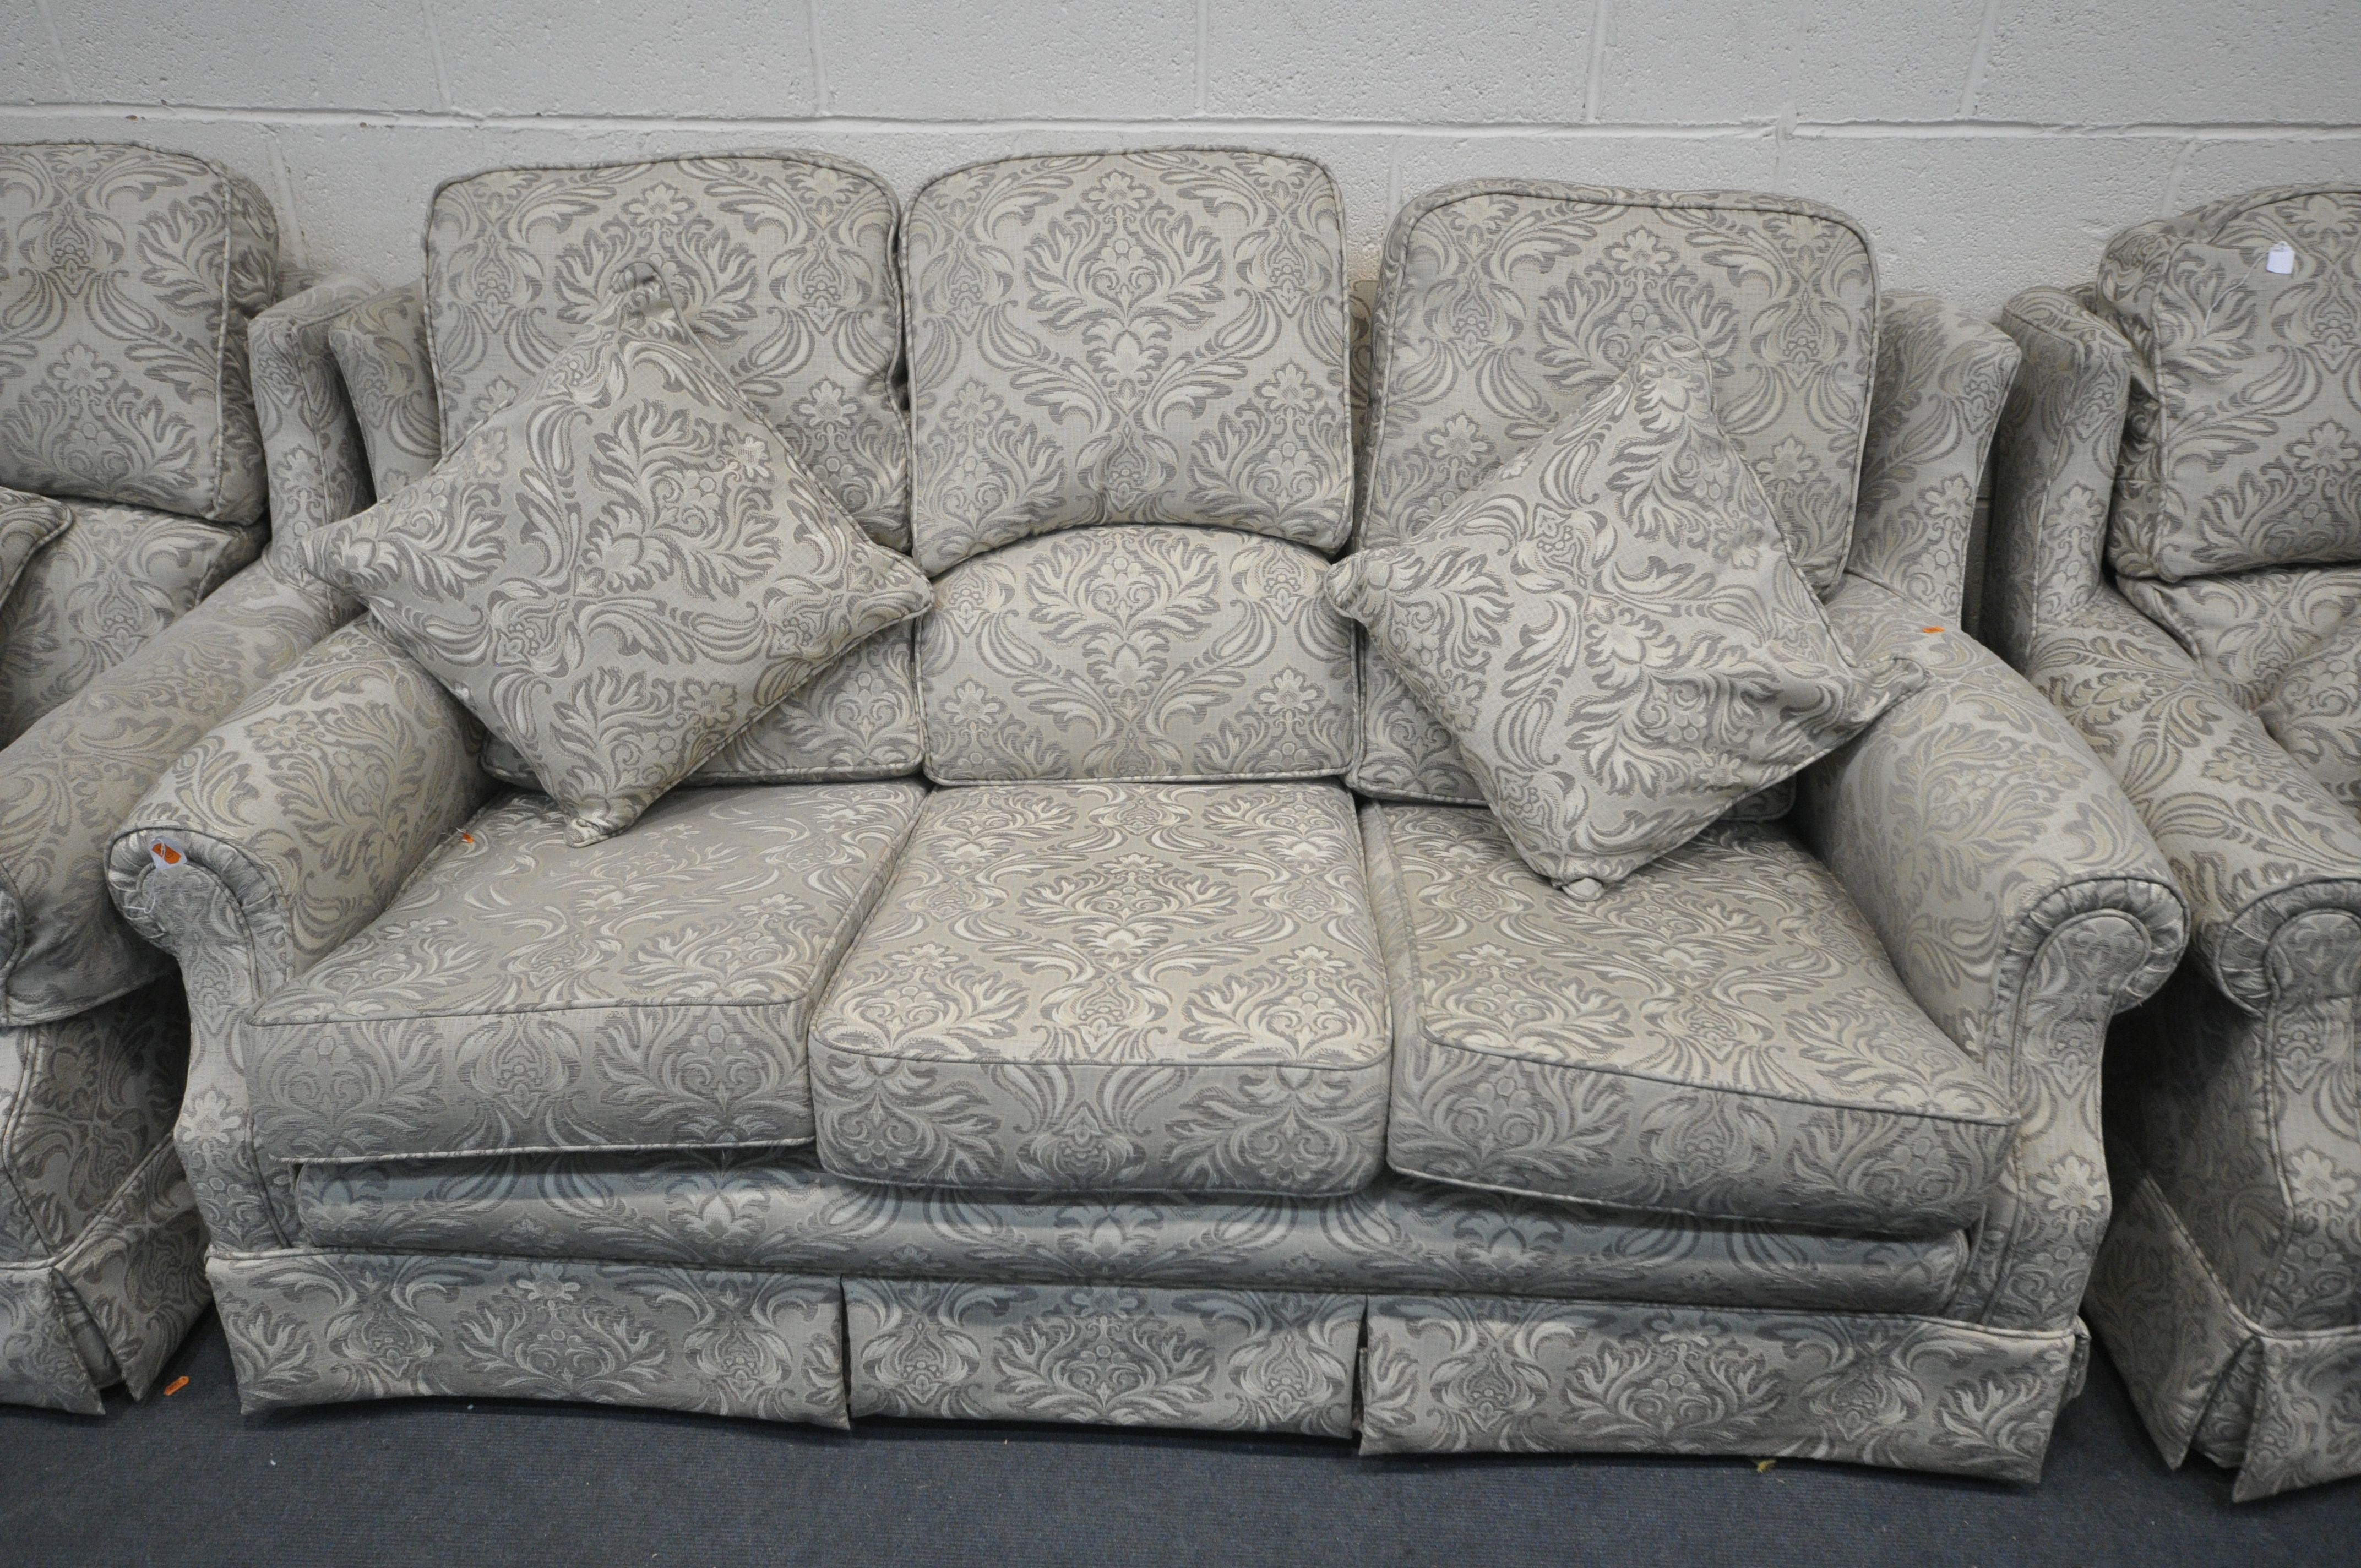 A FLORAL UPHOLSTERED THREE PIECE LOUNGE SUITE, comprising a three seater settee, and a pair of - Image 2 of 3